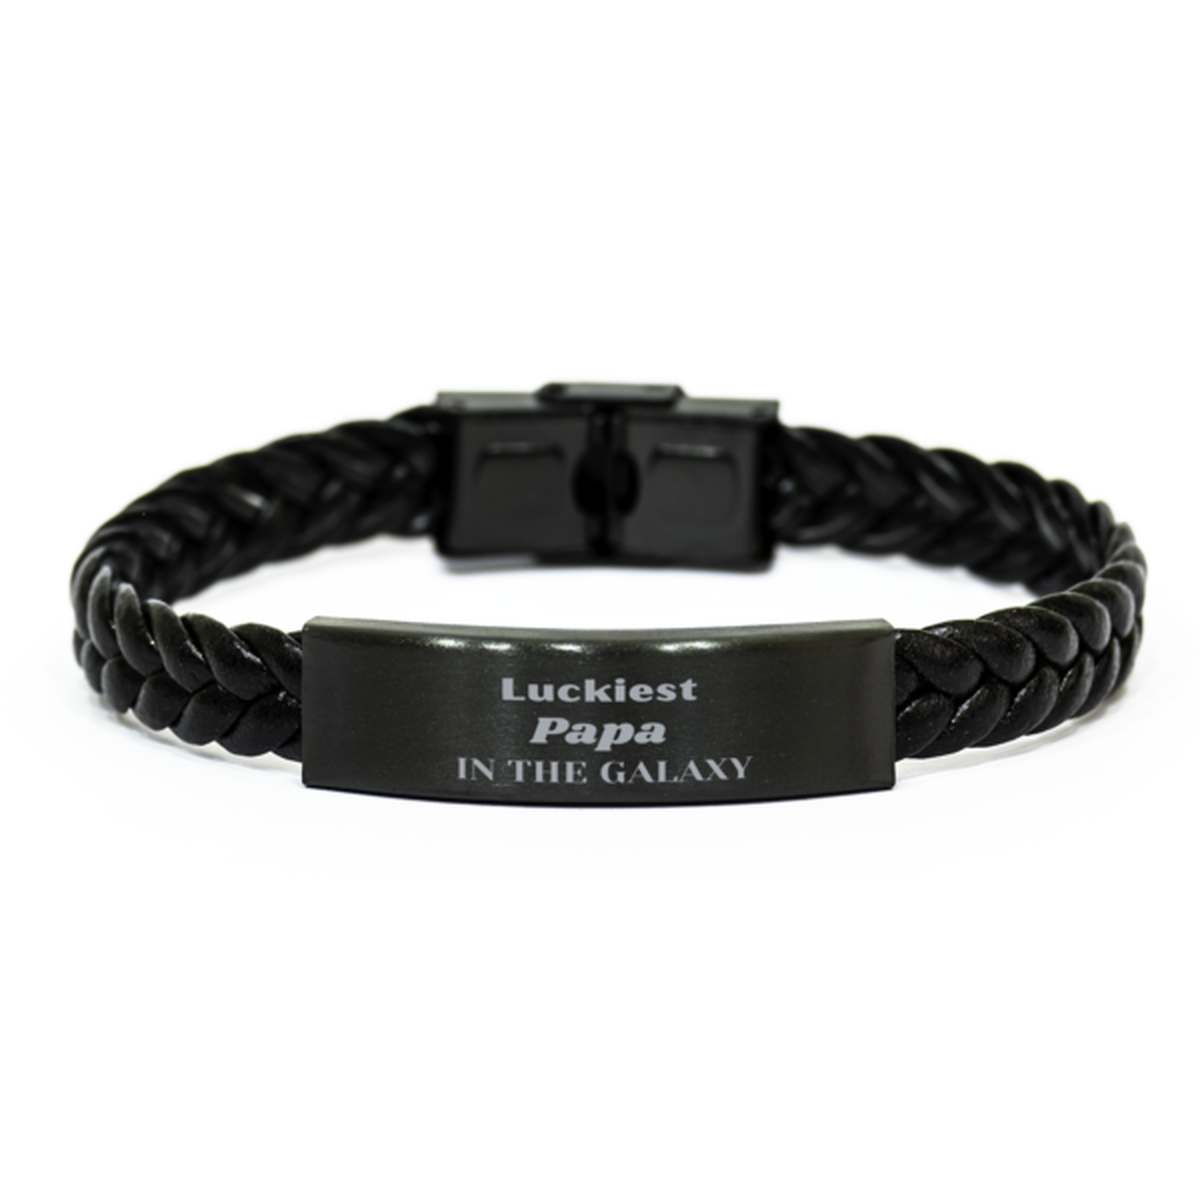 Luckiest Papa in the Galaxy, To My Papa Engraved Gifts, Christmas Papa Braided Leather Bracelet Gifts, X-mas Birthday Unique Gifts For Papa Men Women